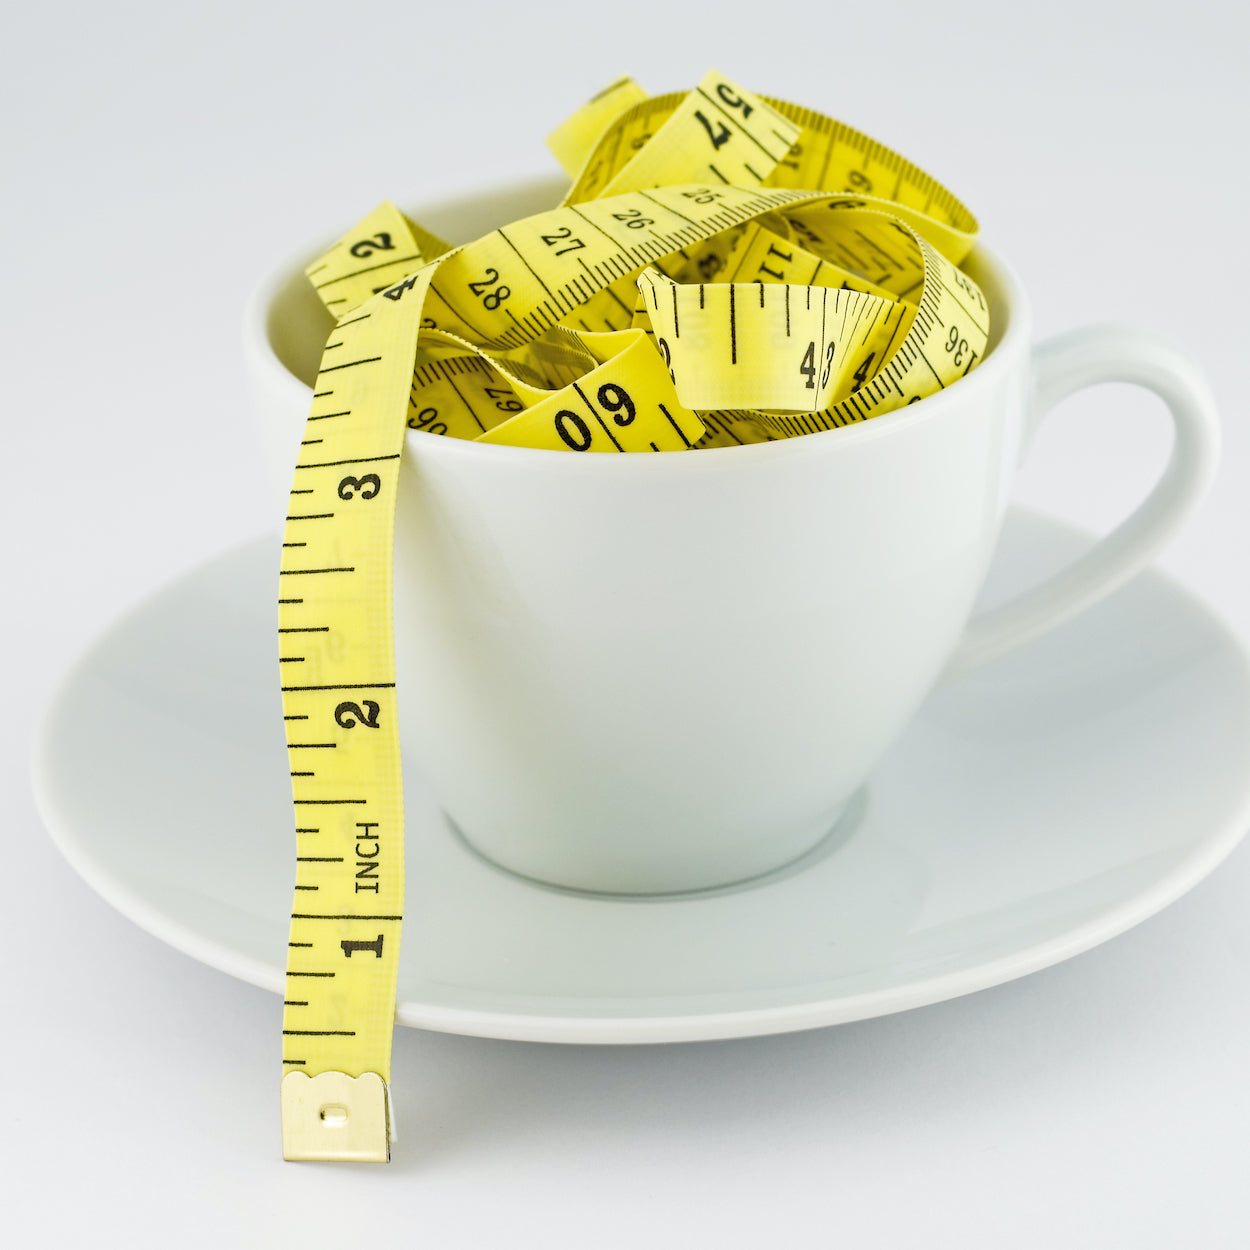 How Many Calories Are In Coffee?